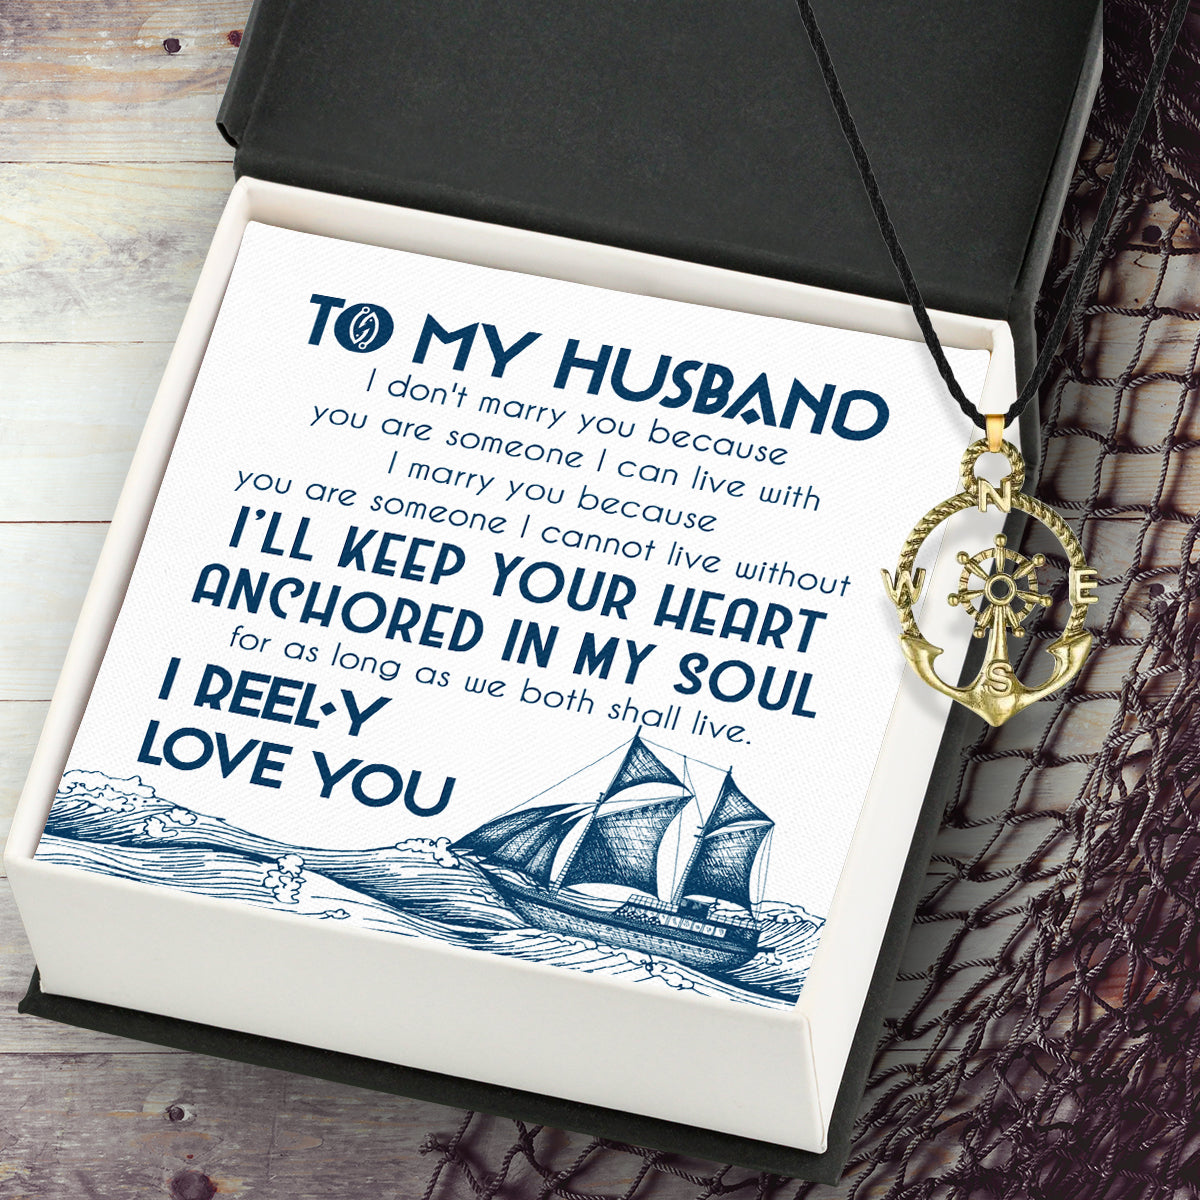 Vintage Anchor Compass Necklace - Fishing - To My Husband - I Reel-y Love You - Ukgnfx14005